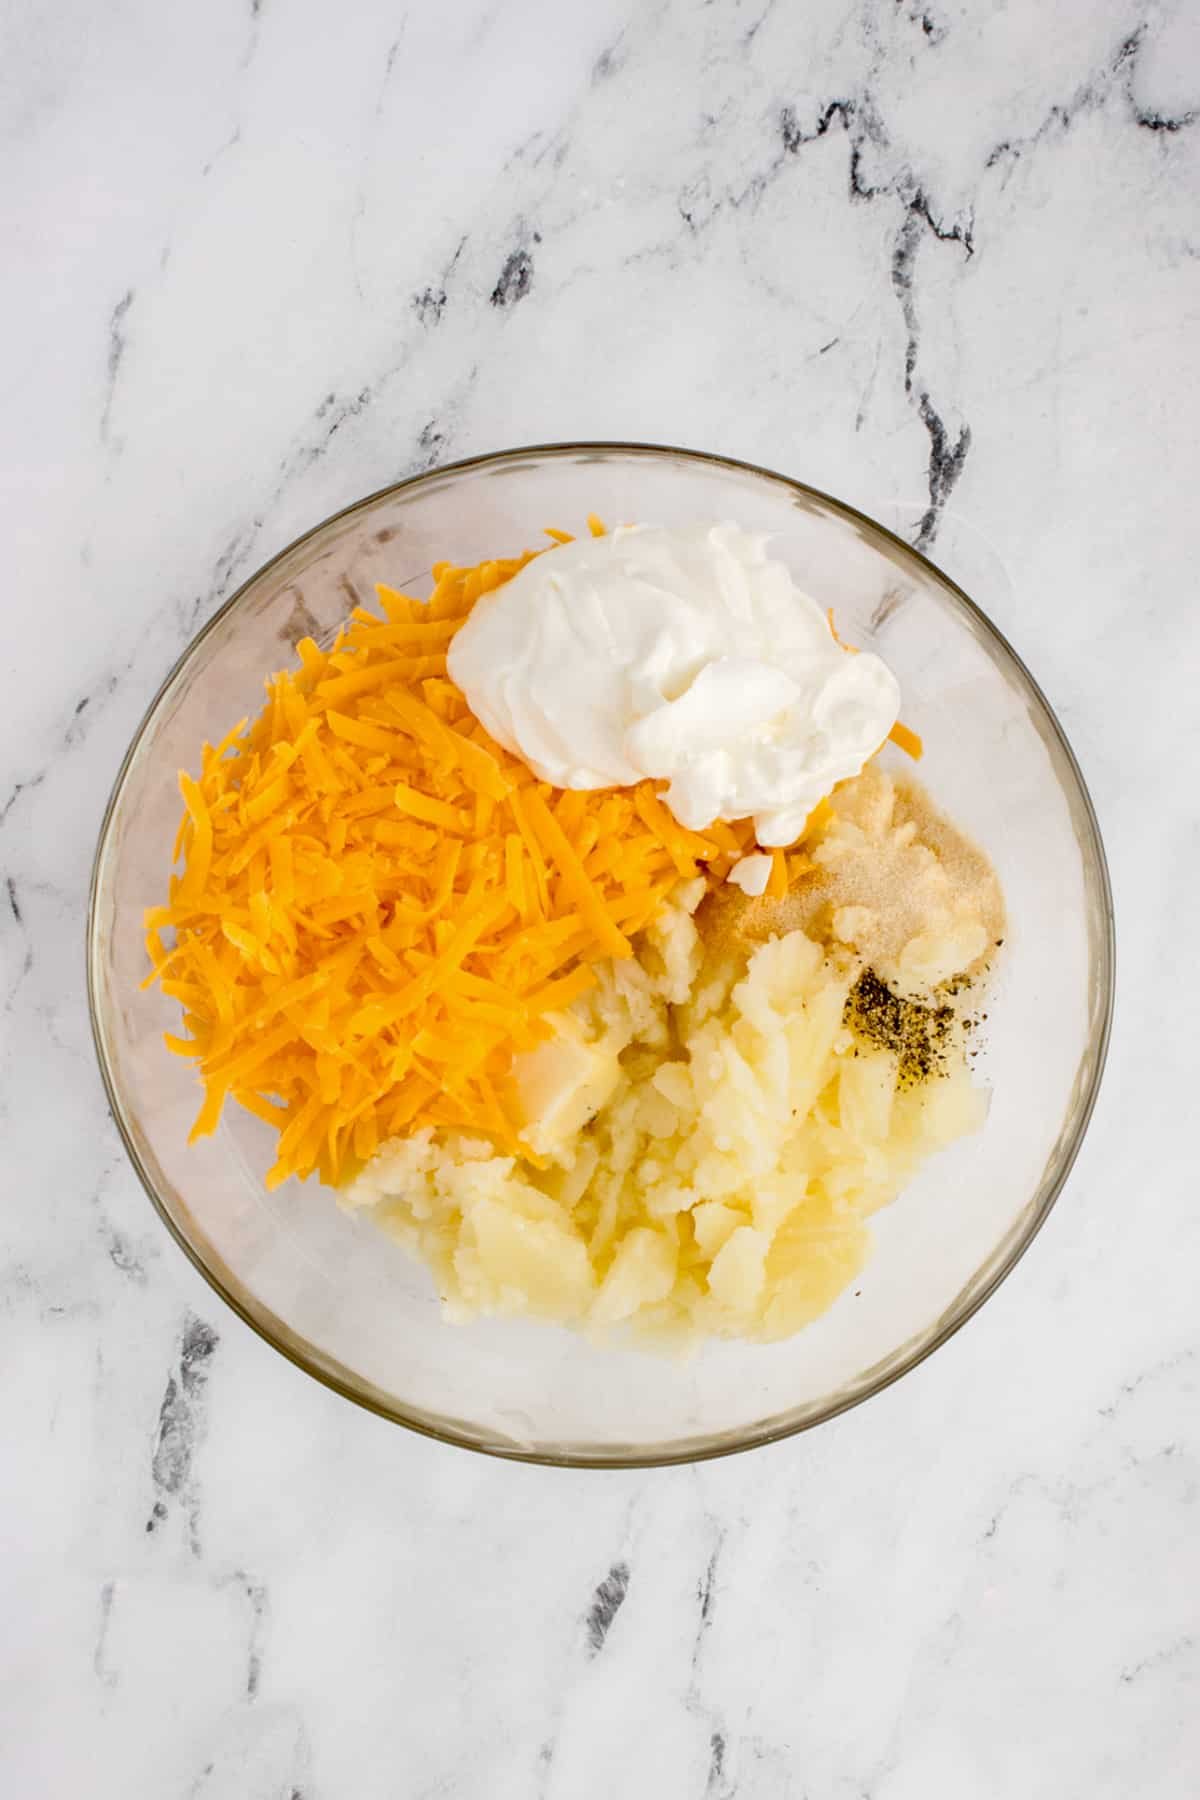 A bowl with mashed potato, cheese, sour cream, and spices.